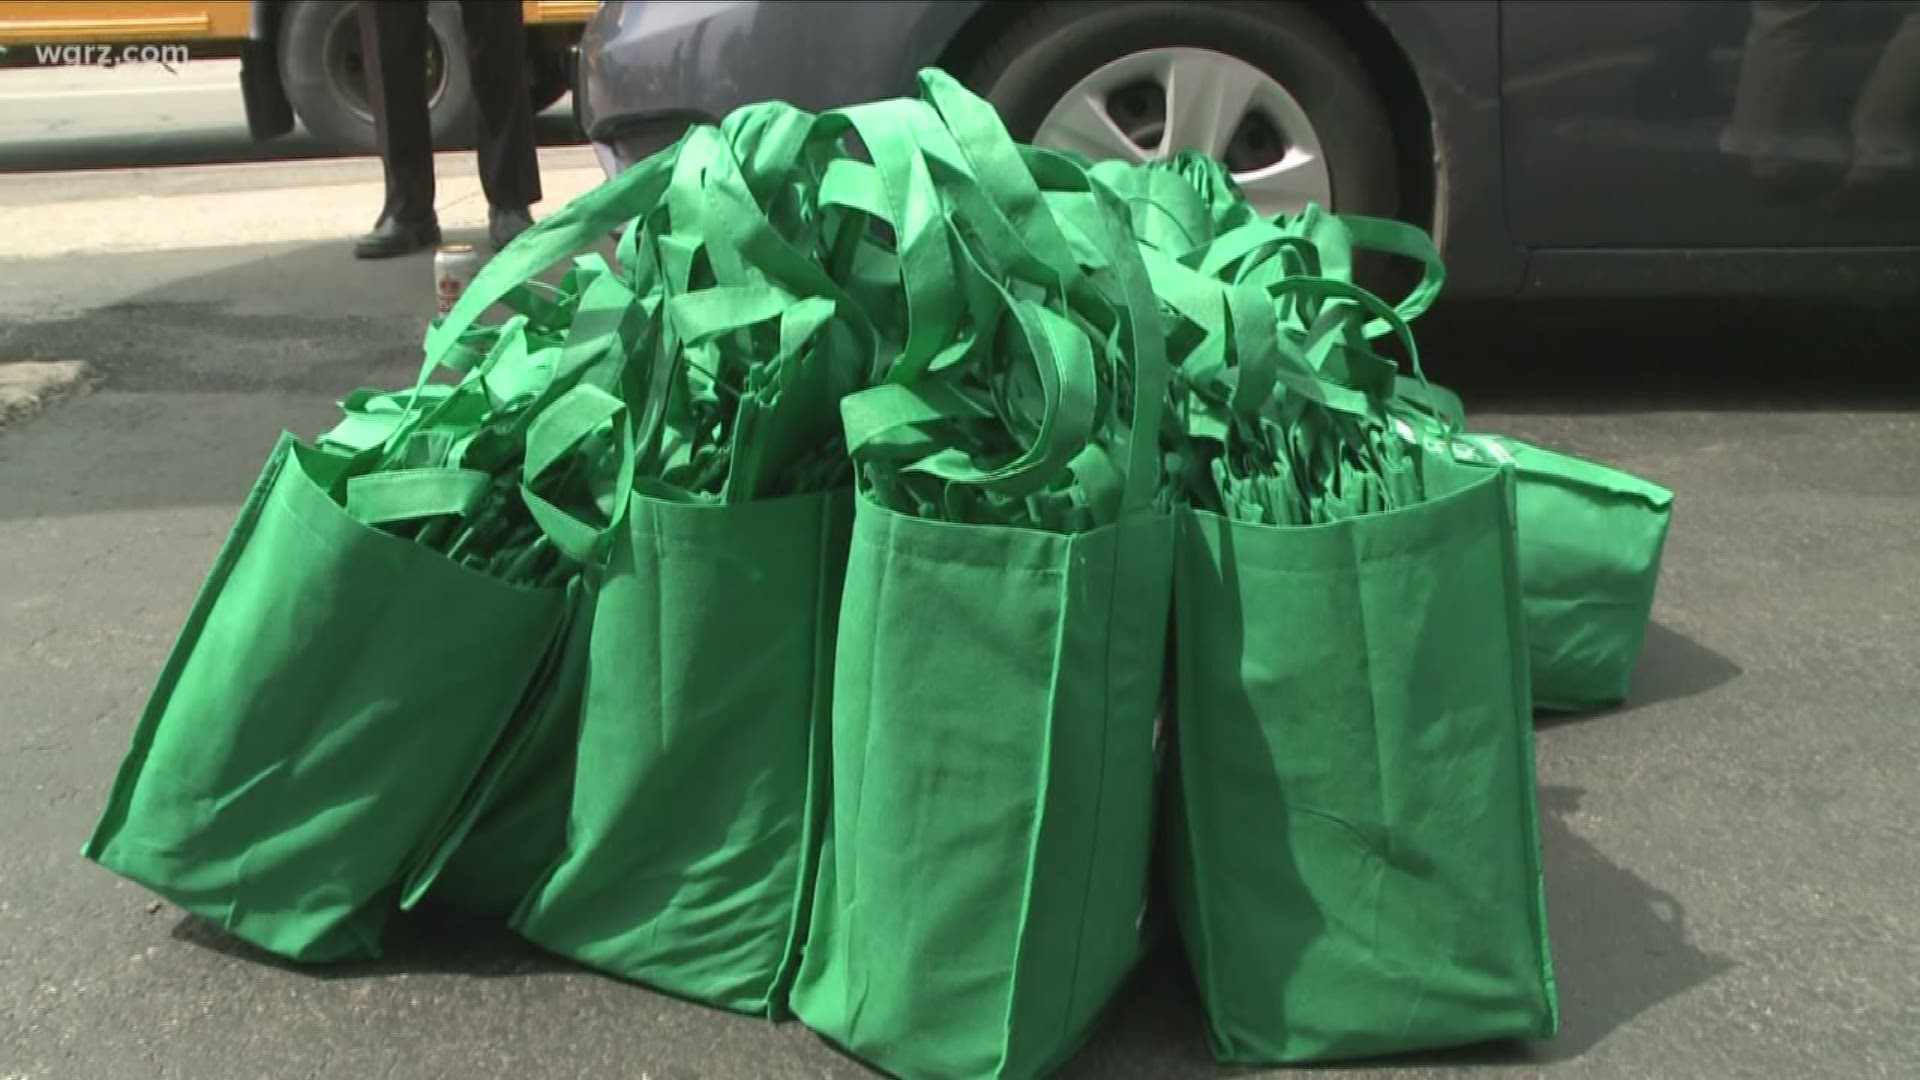 Erie County Executive defends possible charge on paper shopping bags as good for the environment. Critics call it another tax.